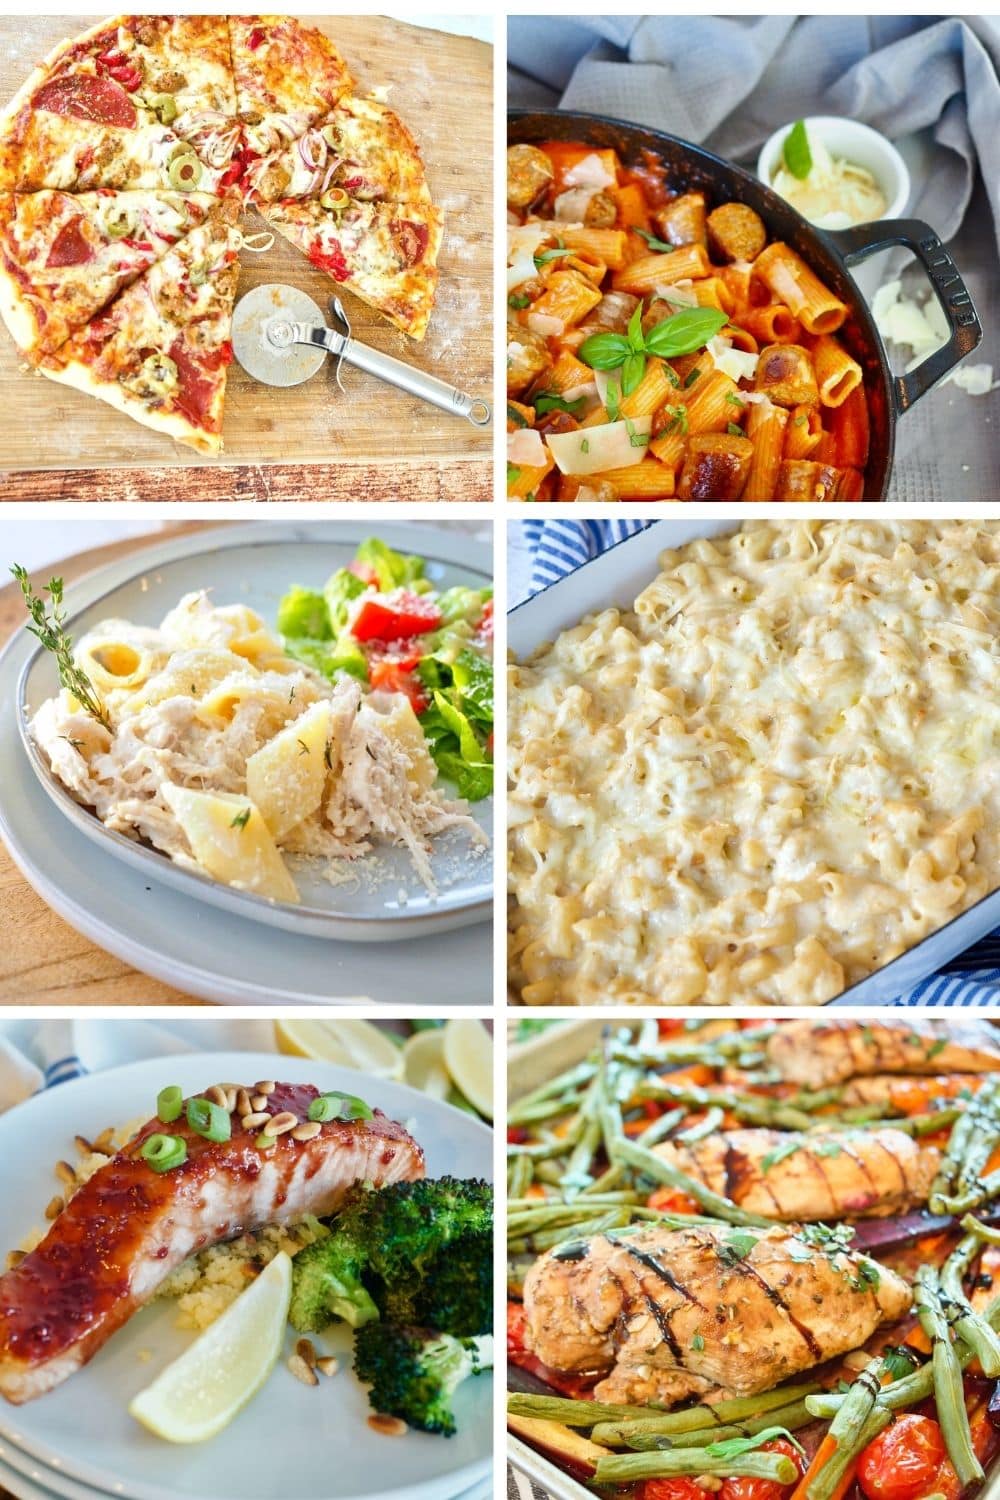 6 image grid of Valentine's Day dinners, Pizza, Penna ala vodka, Olive Garden Chicken, Smoked Mac and Cheese, Raspberry Salmon, Balsamic Chicken.